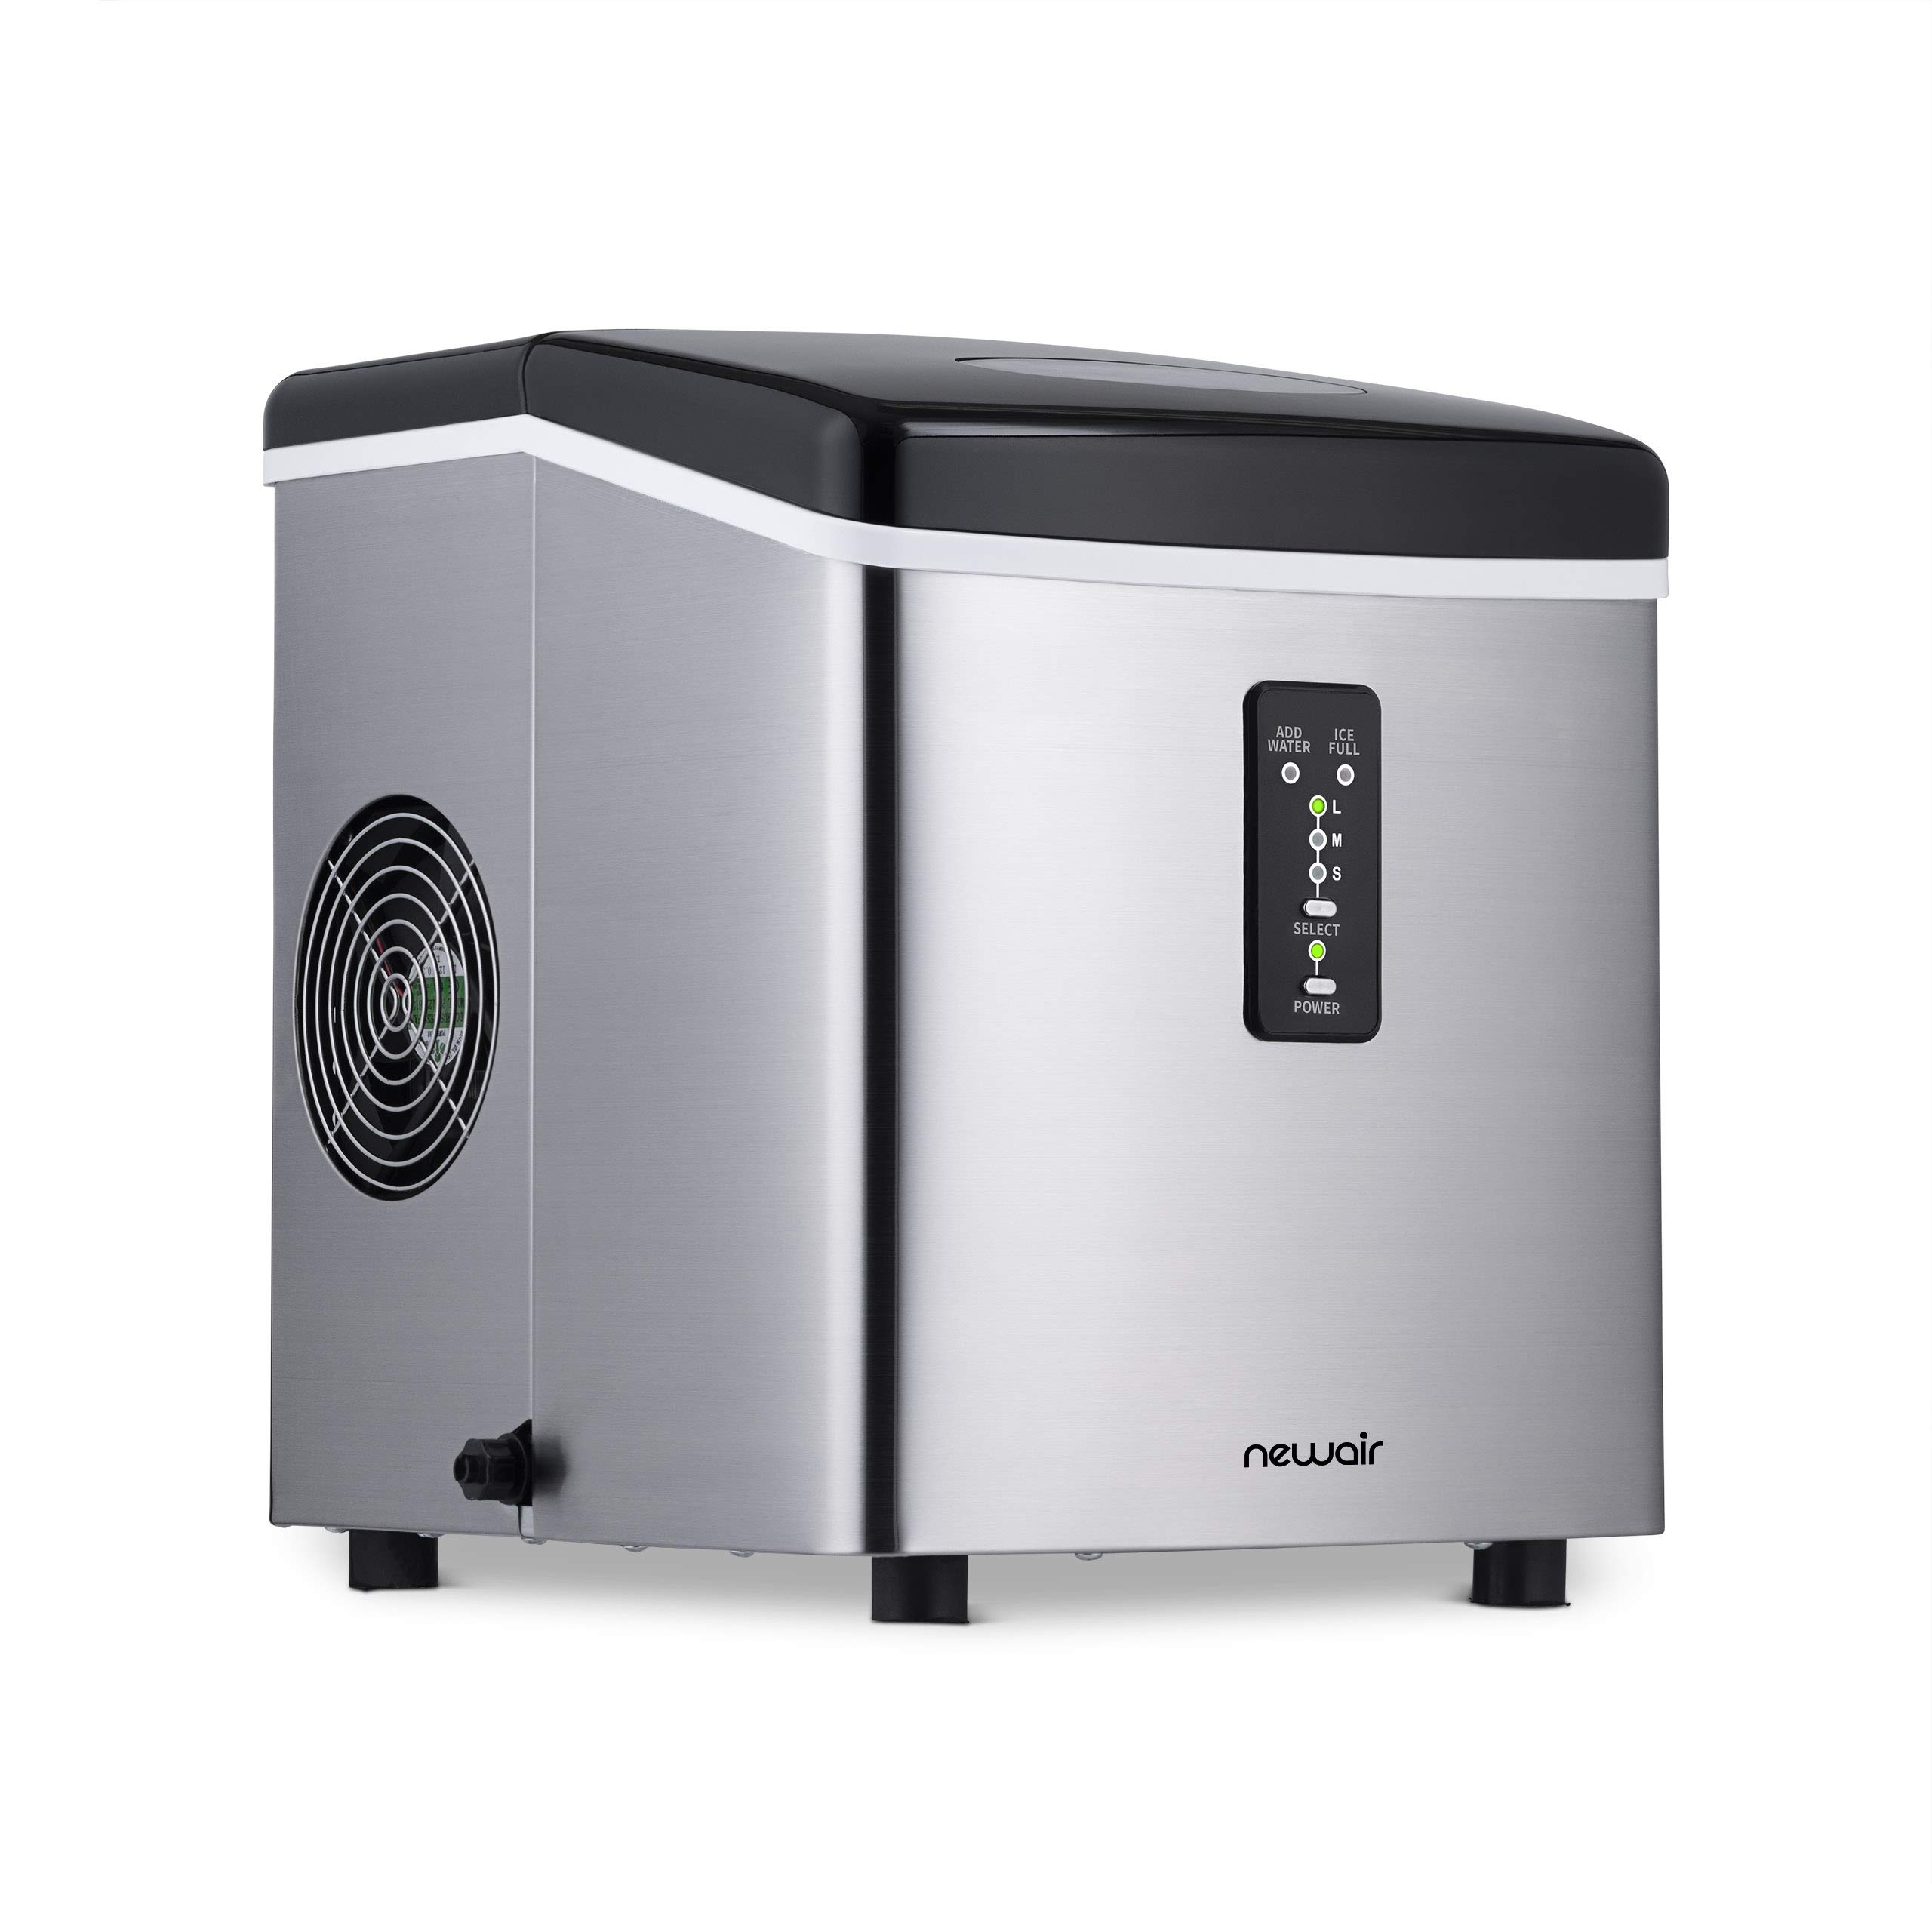 NewAir Portable Ice Maker 28 lb. Daily - Countertop Compact Design, Ice in Under 10 Minutes, 3 Size Bullet Shaped Ice, LED Controls, Stainless with Black Lid | AI-100SS